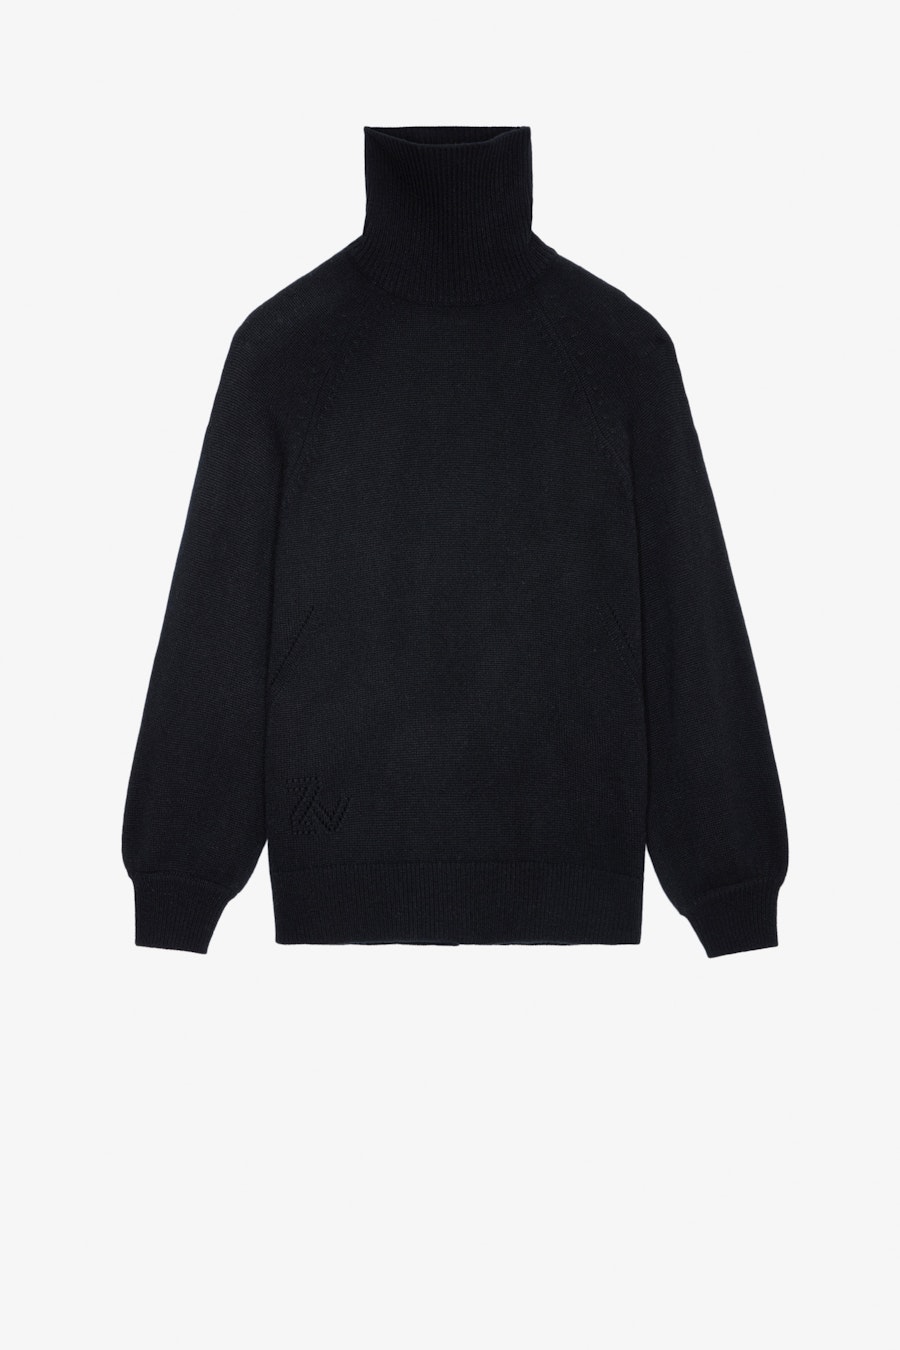 ZADIG&VOLTAIRE Mory Cashmere Sweater